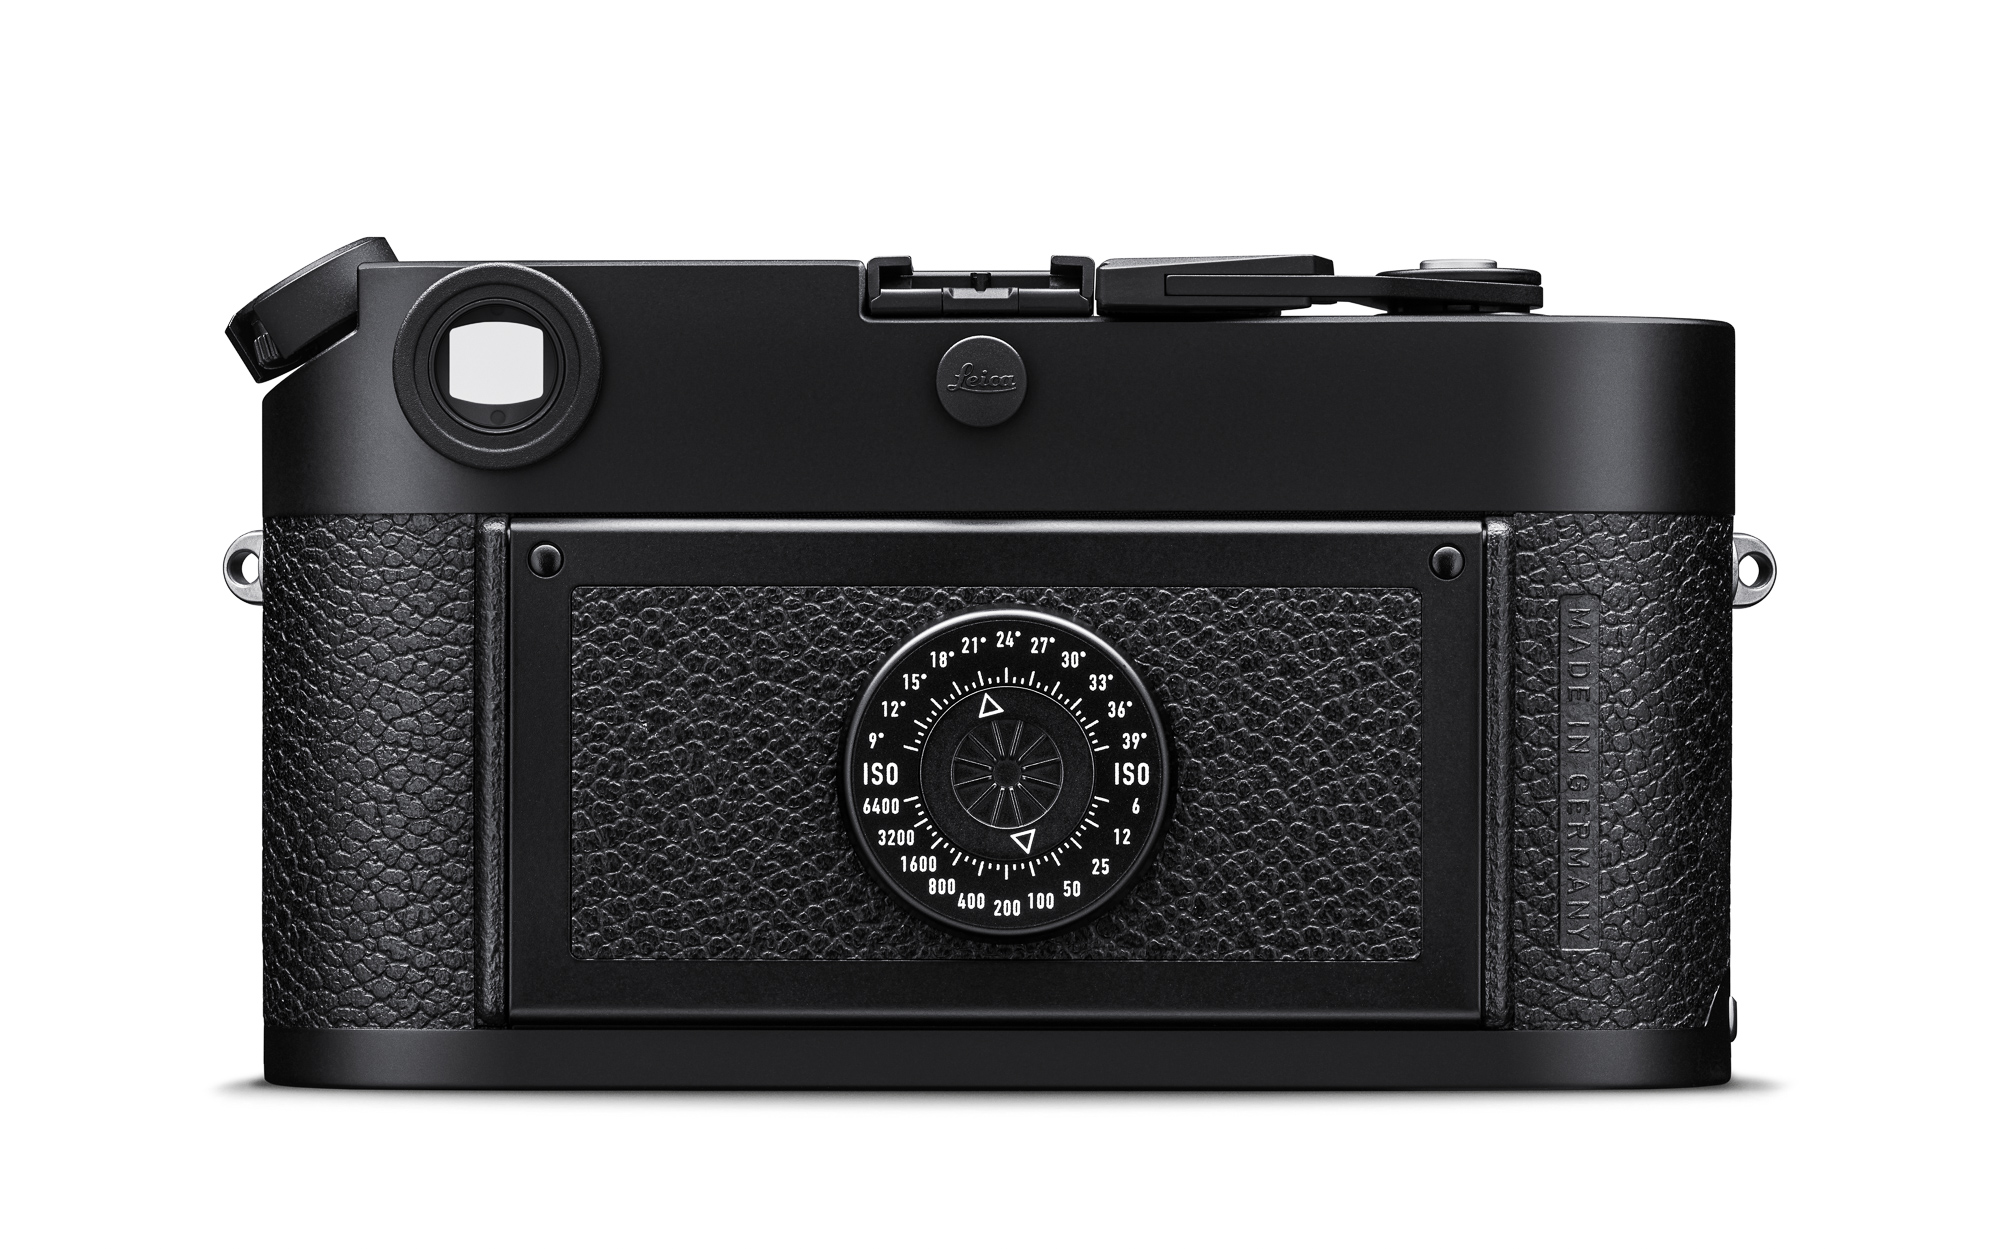 Leica Relaunches Iconic M6 Analog Rangefinder with Modern Updates